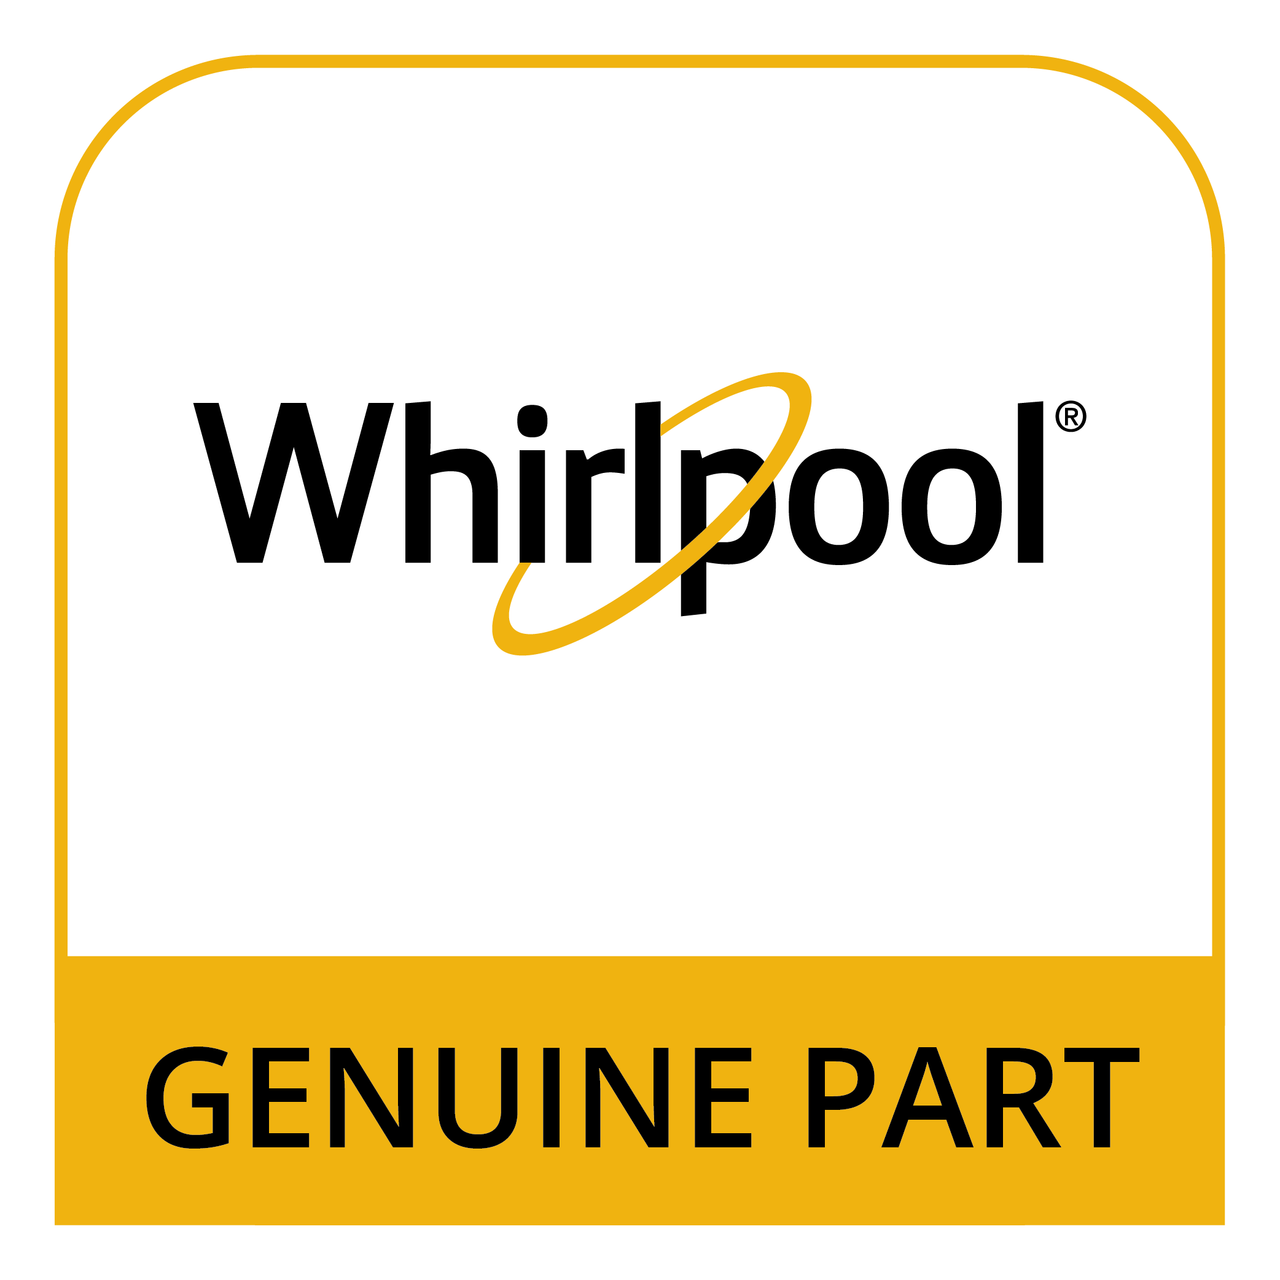 Whirlpool WP63907 - Top Load Washer Suspension Spring - Genuine Part